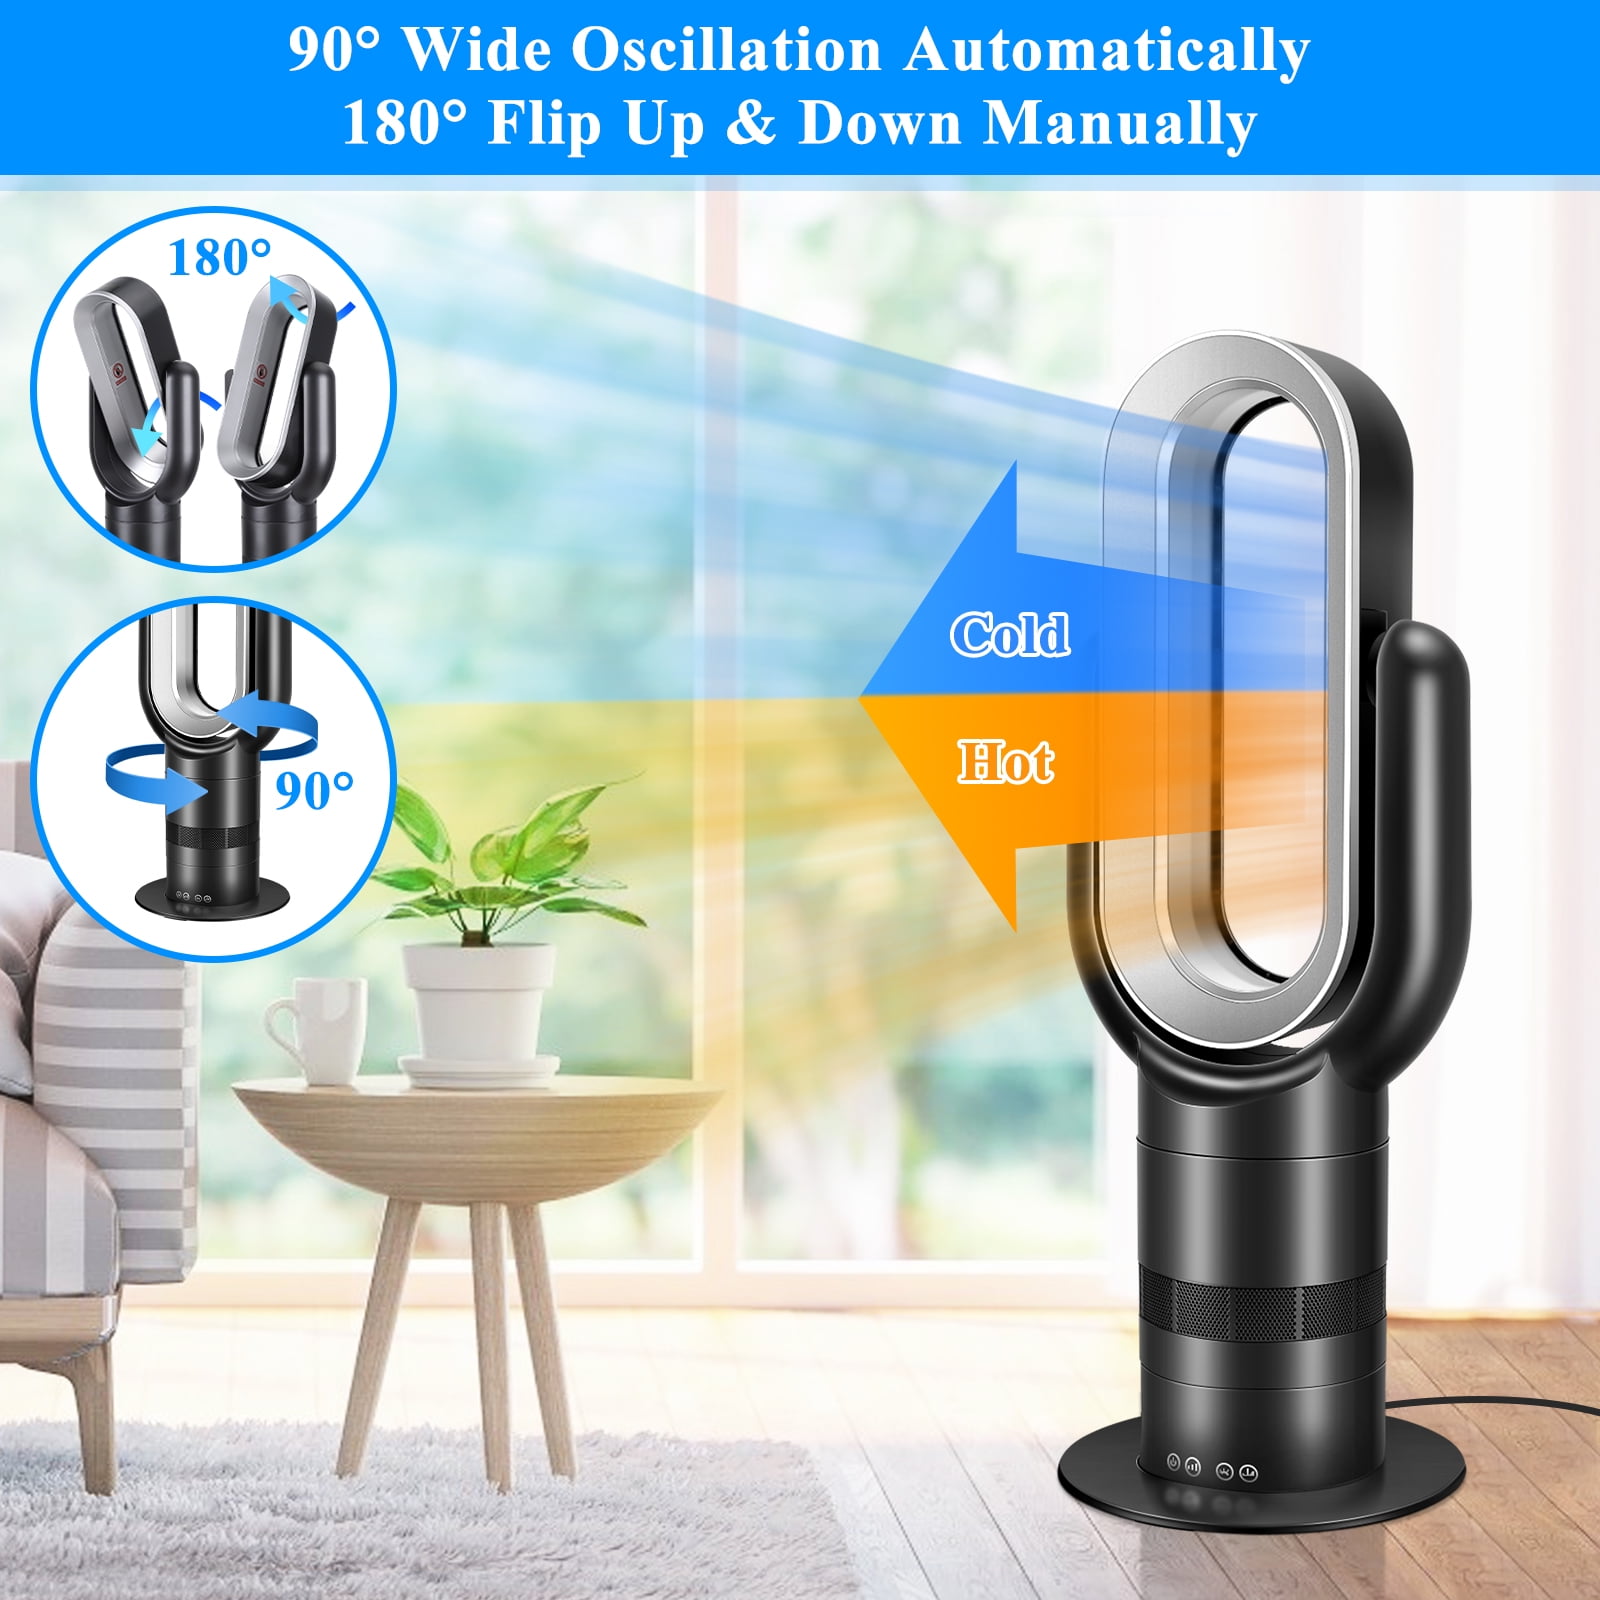 HealSmart 26-inch Space Heater Bladeless Tower Fan, Heater & Coolingn Combo, with Remote Control, for Home Air Conditioner, - Walmart.com